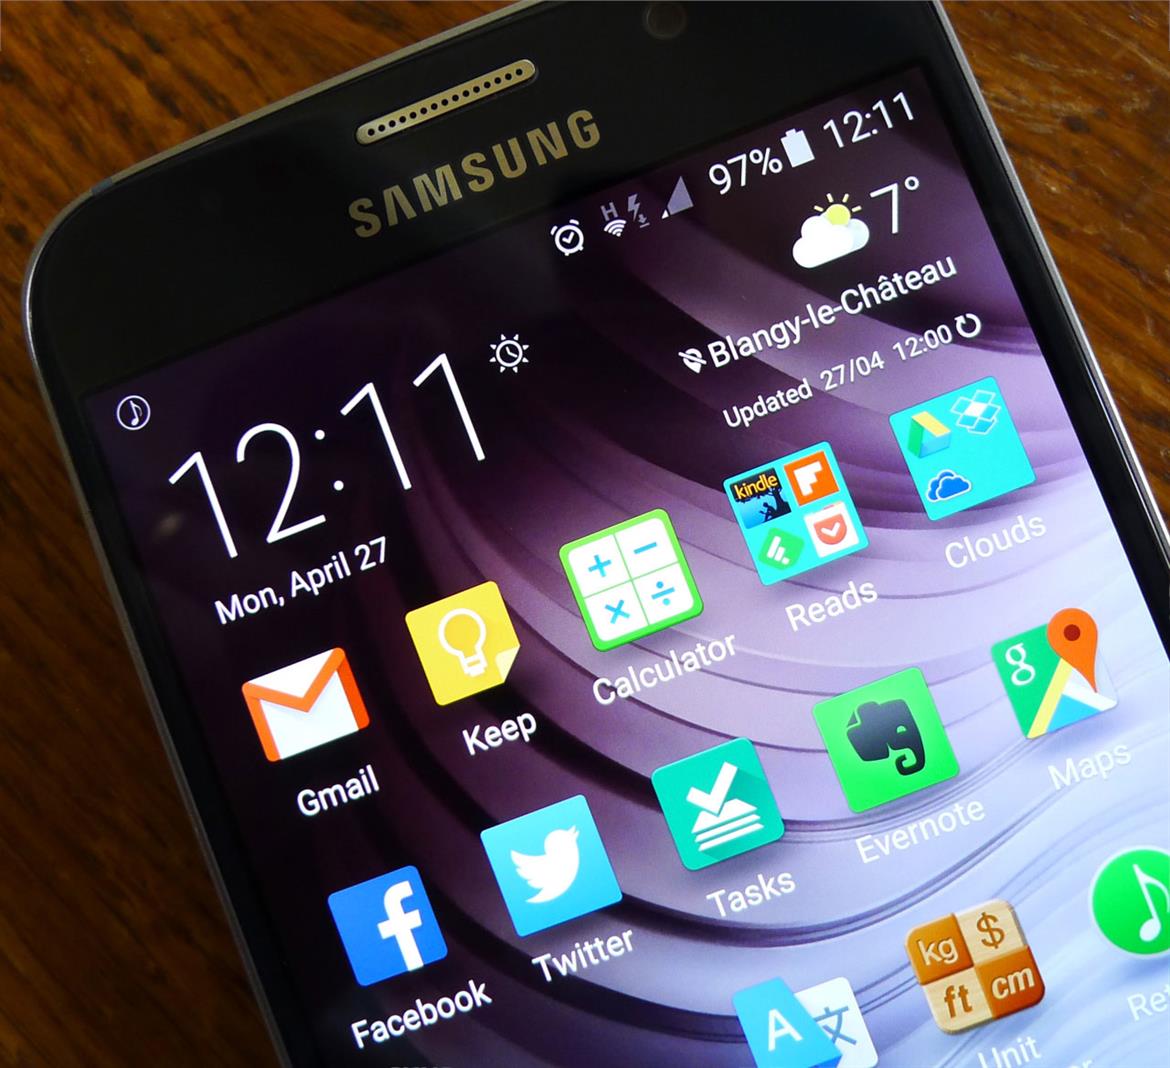 Ditching My iPhone For The Samsung Galaxy S6